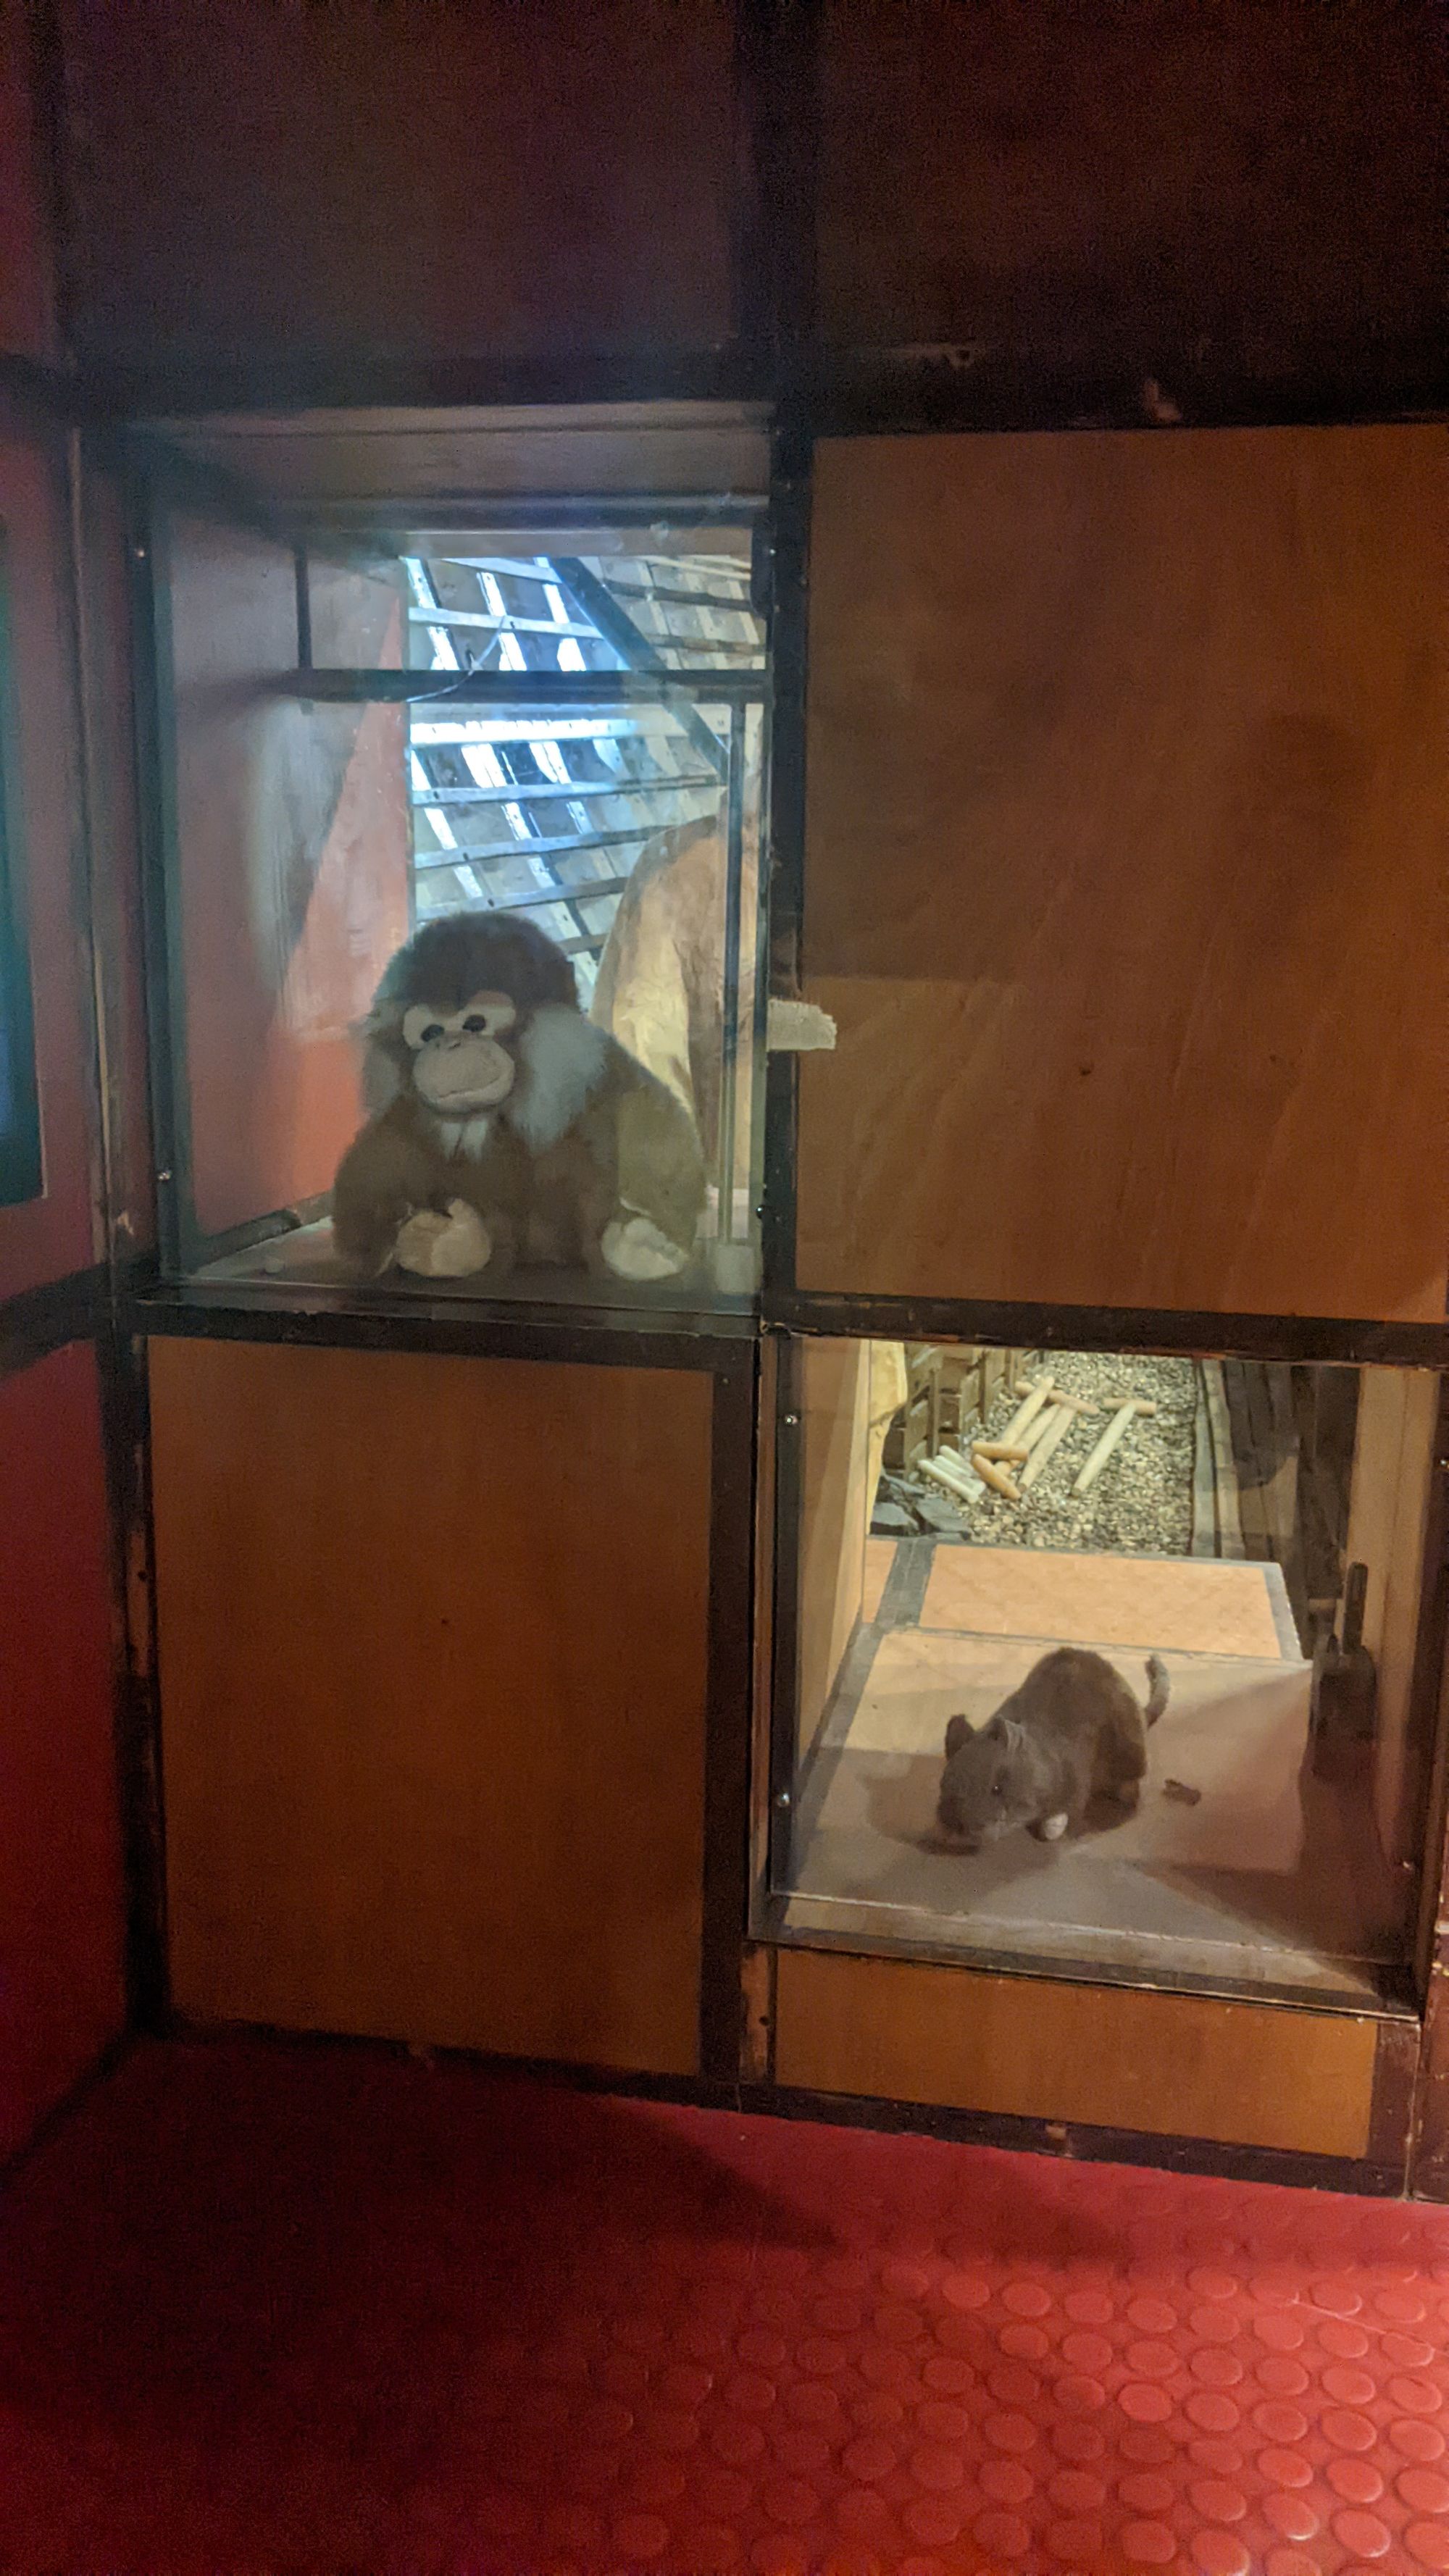 Image of a plushie rat and monkey in separate glass boxes